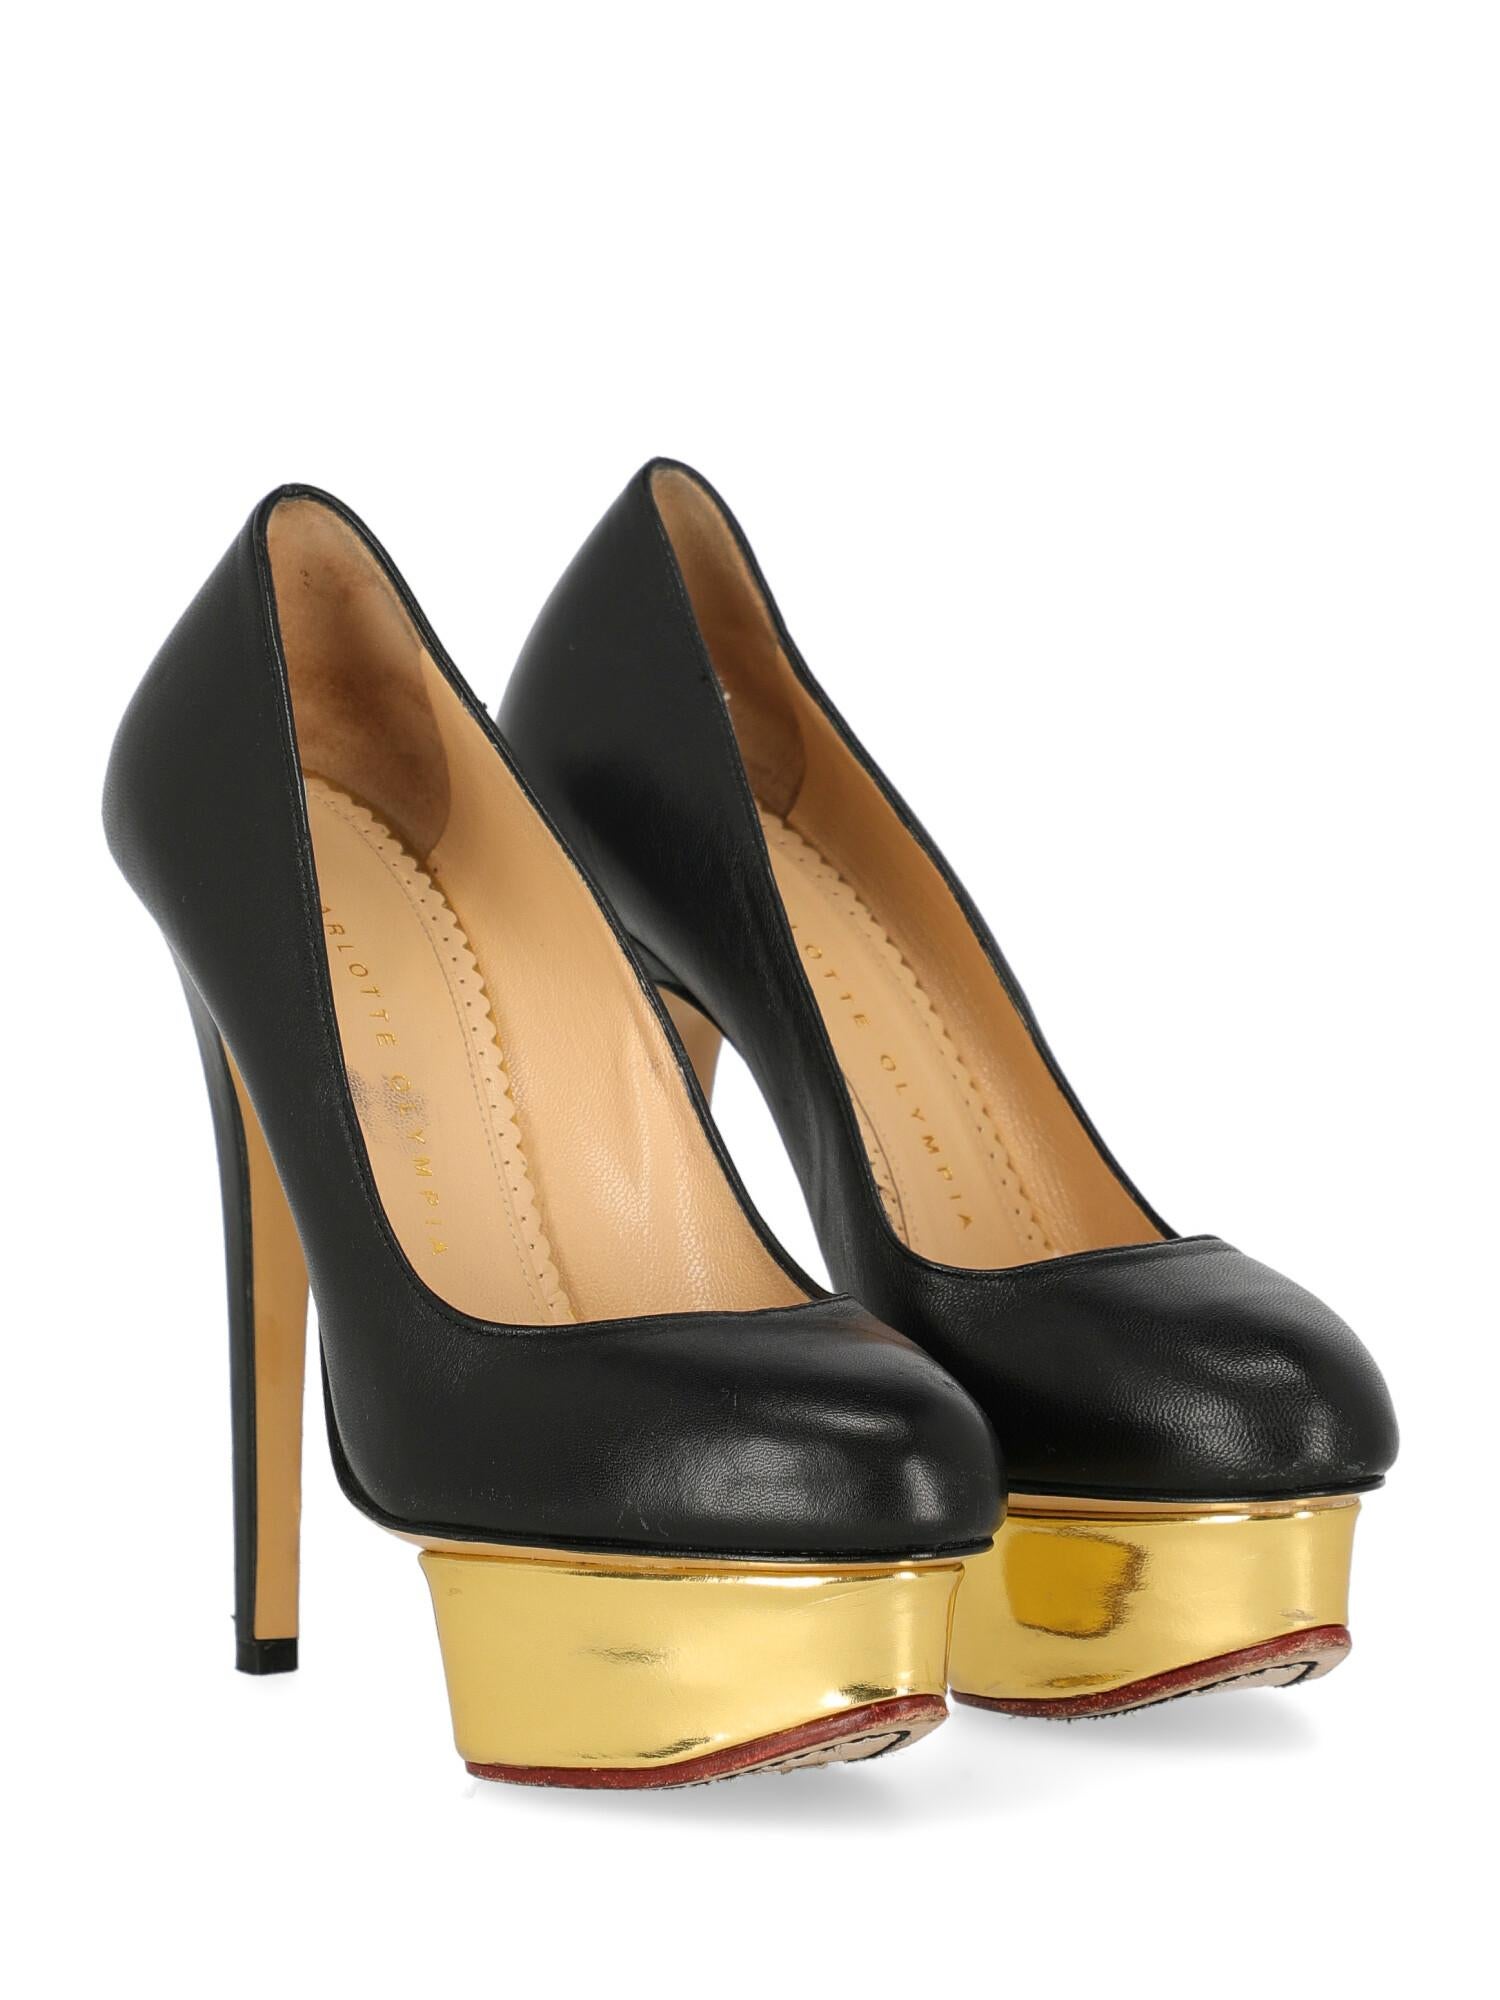 Shoe, leather, solid color, gold-tone hardware, branded insole, with plateau, high heel, leather lining, metal application

Includes: N/A

Product Condition: Good
Heel: negligible marks, slightly visible scratches. Sole: visible signs of use. Upper: